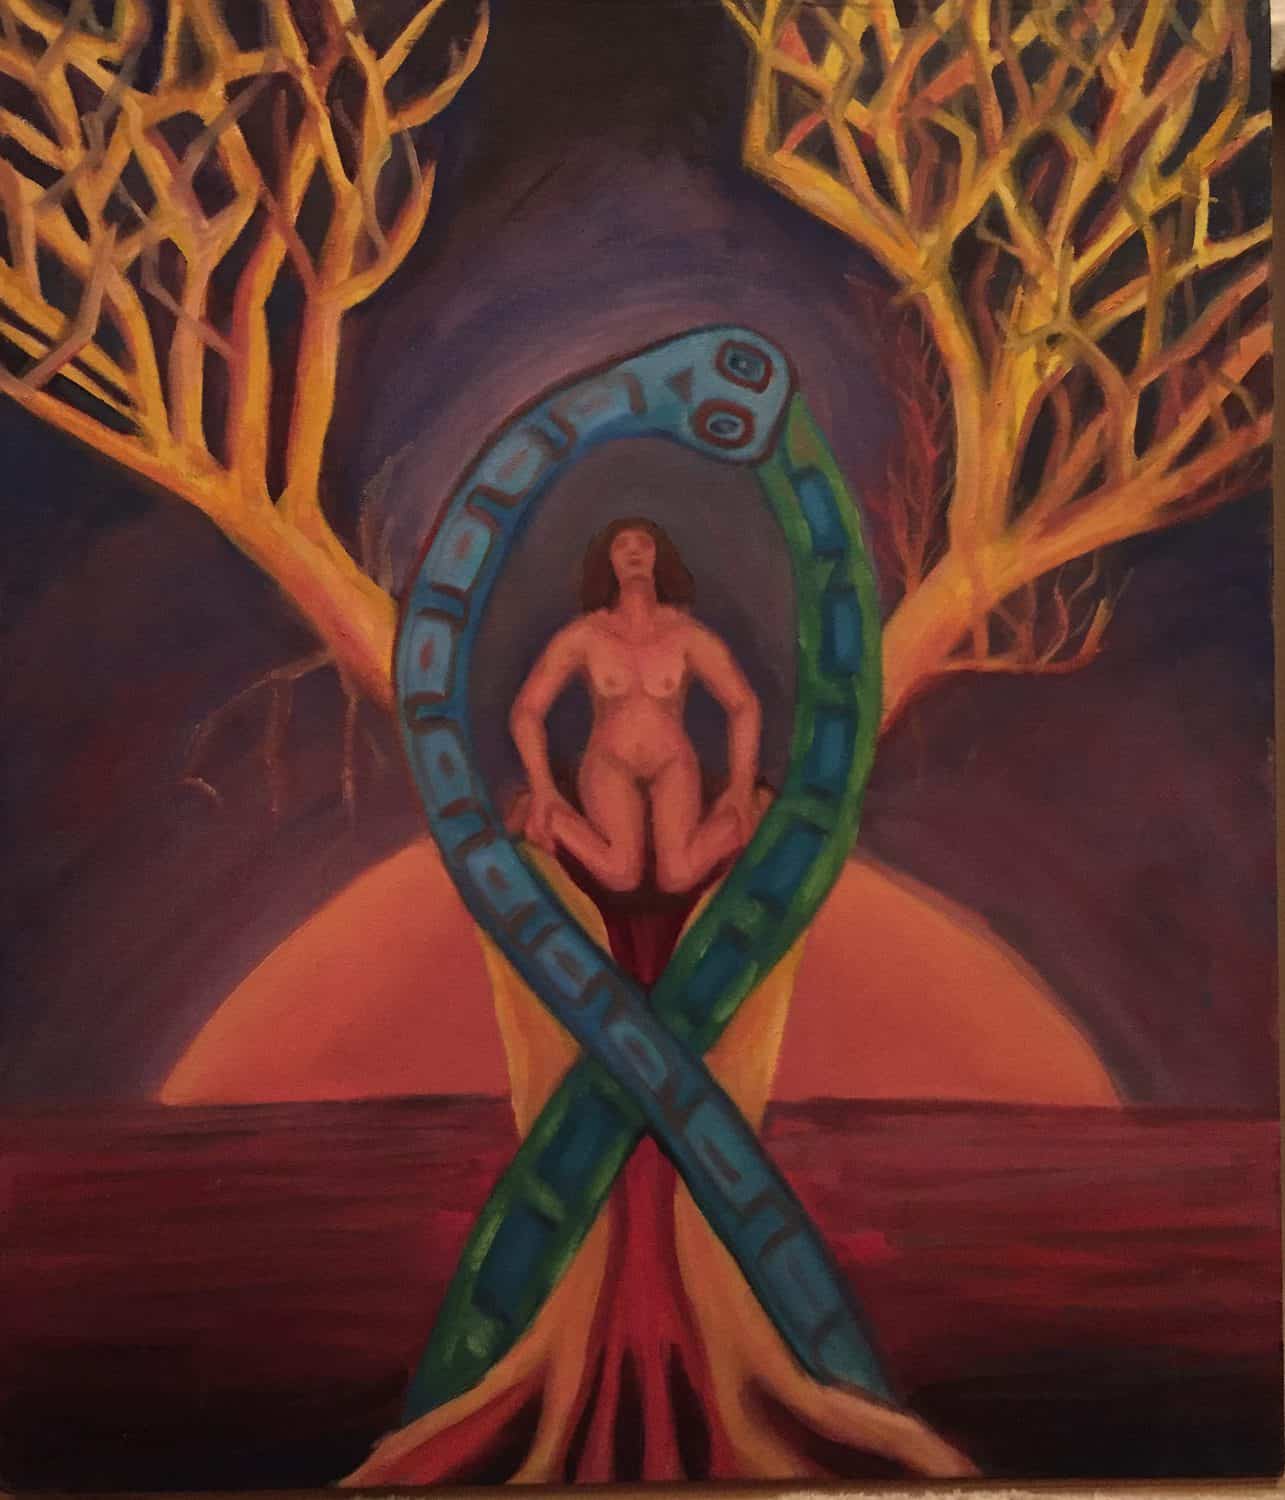 Figure sitting on top of tree trunk split in half and encircled by an ouroboros snake